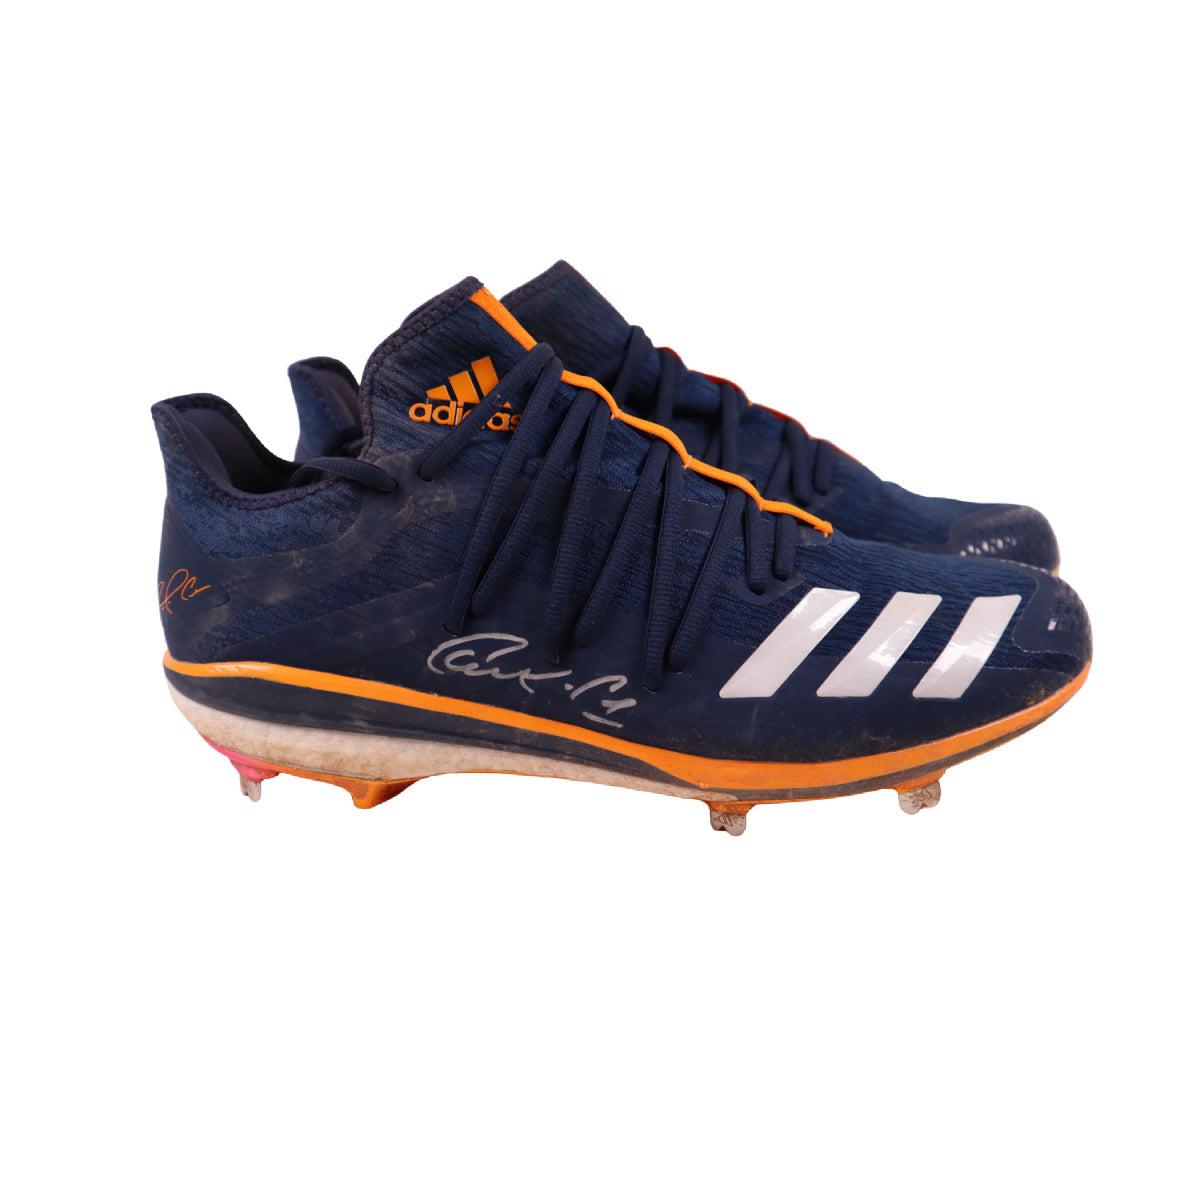 Carlos Correa Autographed Game Used Houston Astros Cleats Signed JSA C –  Zobie Productions